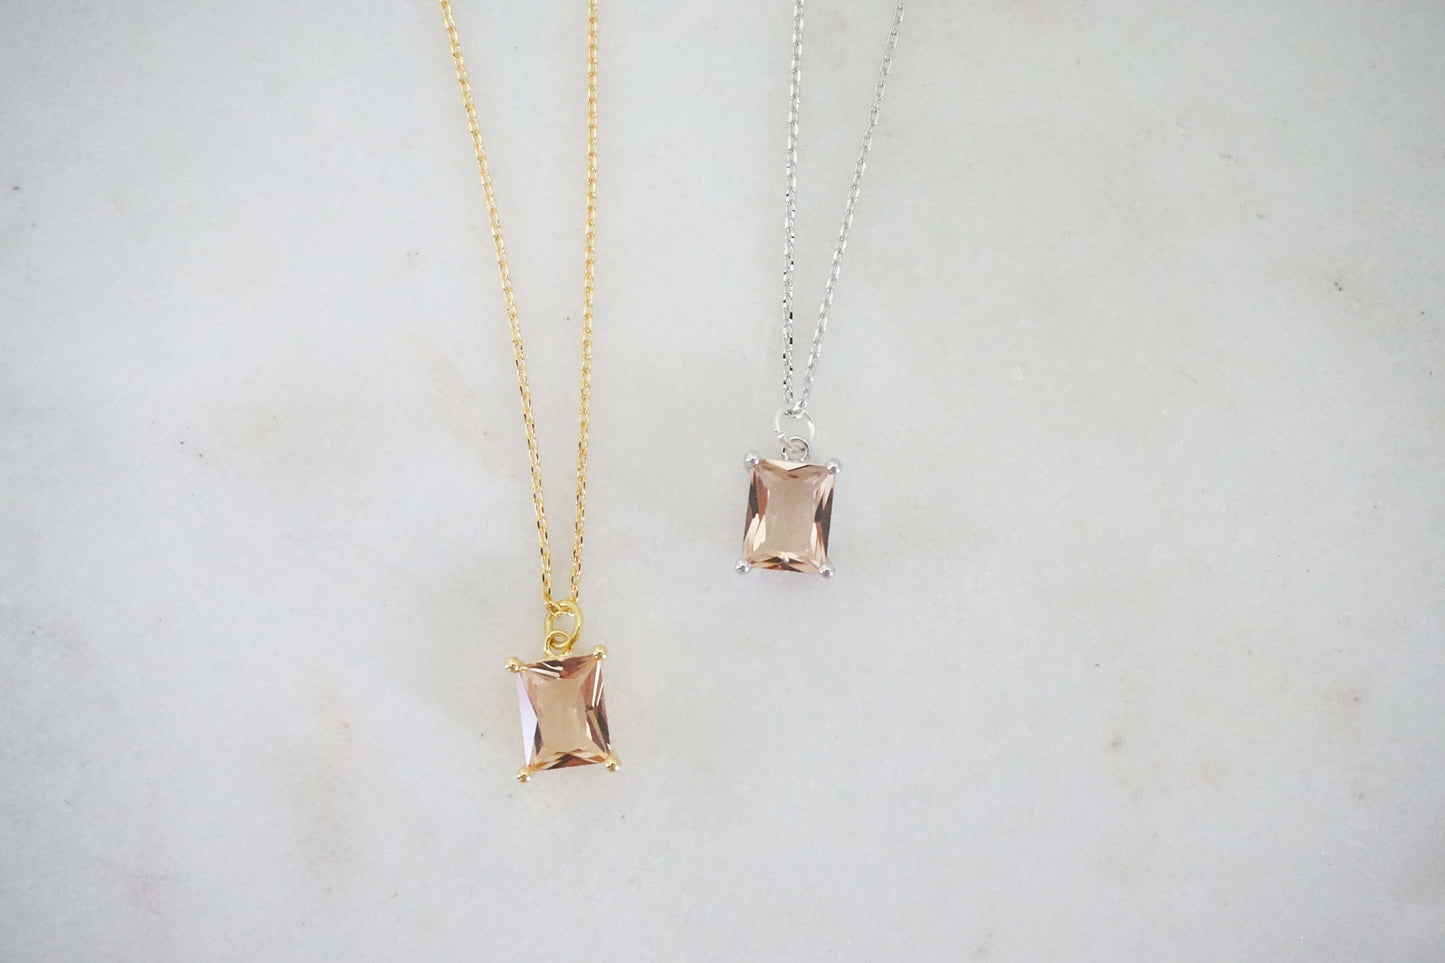 Champagne Square Cut Gem Necklaces | Bridesmaid Necklaces | Wedding Jewelry | NCHPG19, NCHPS19